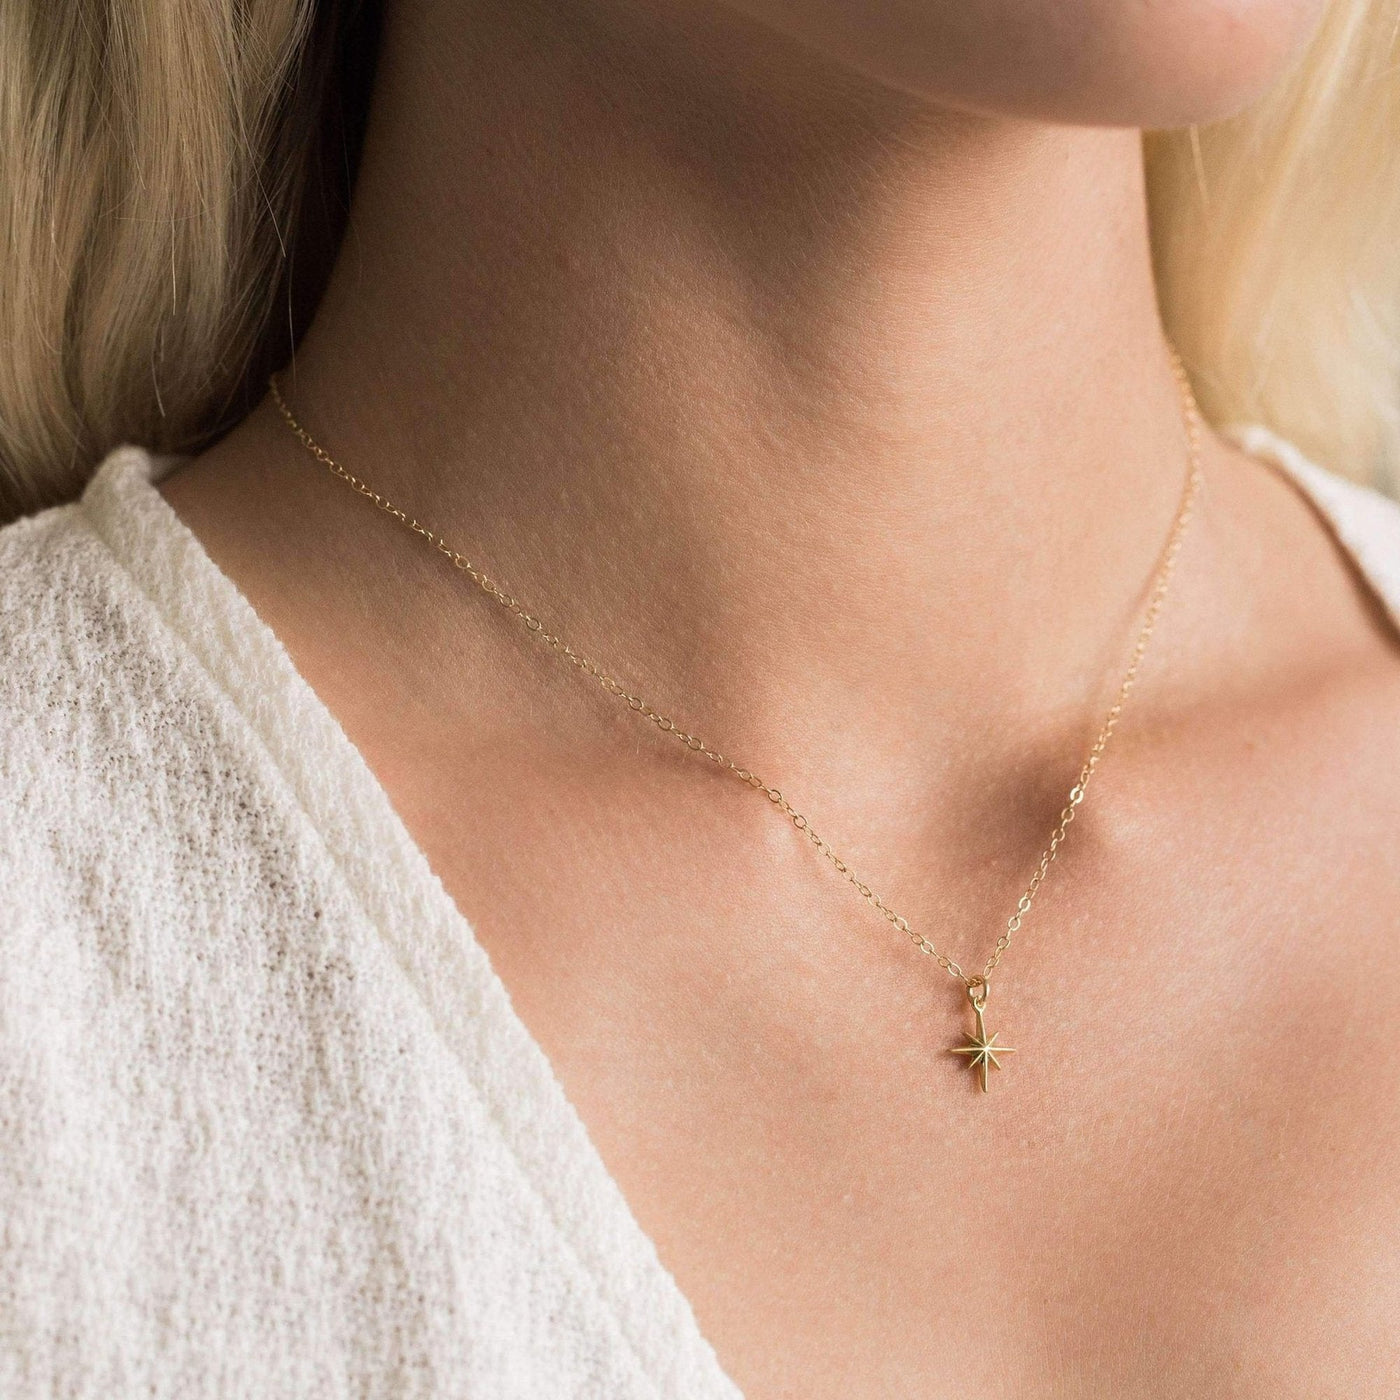 Starburst Necklace | Simple & Dainty